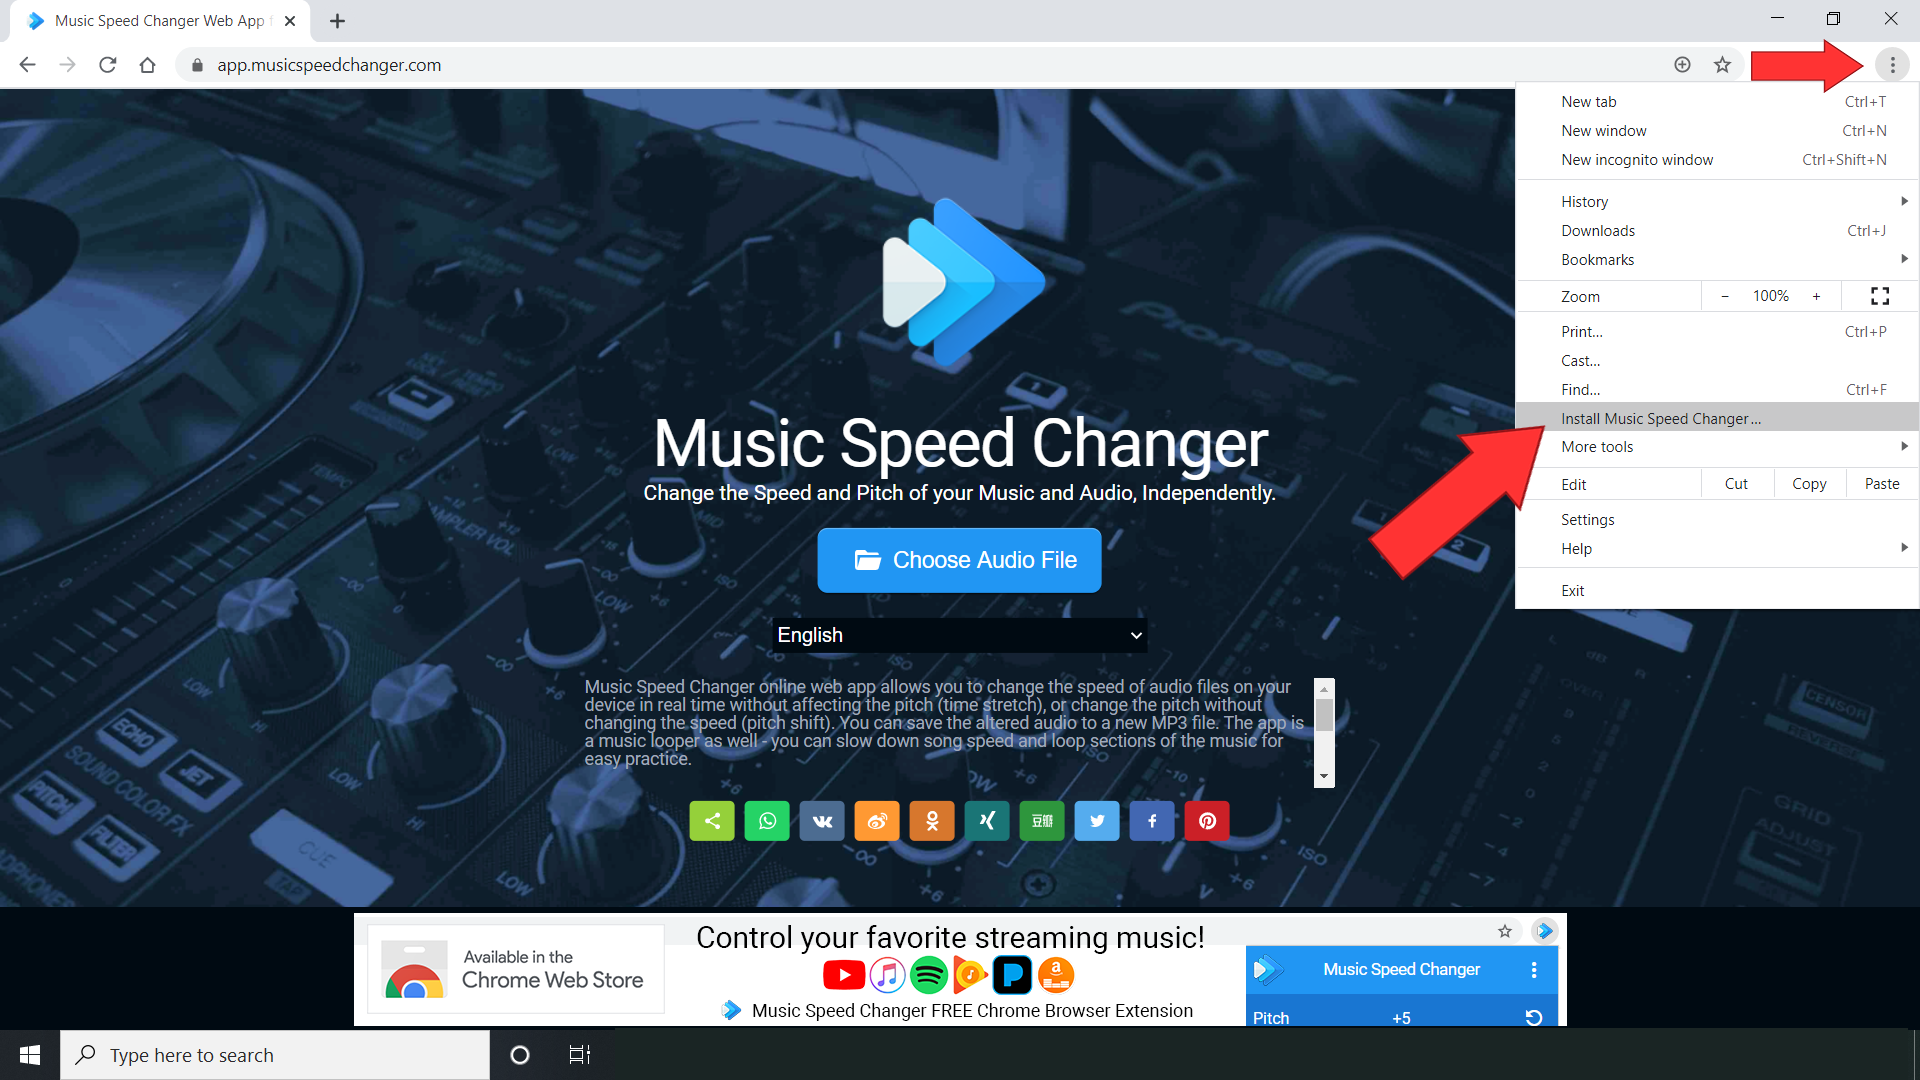 Install the Music Speed Changer Web App on your PC